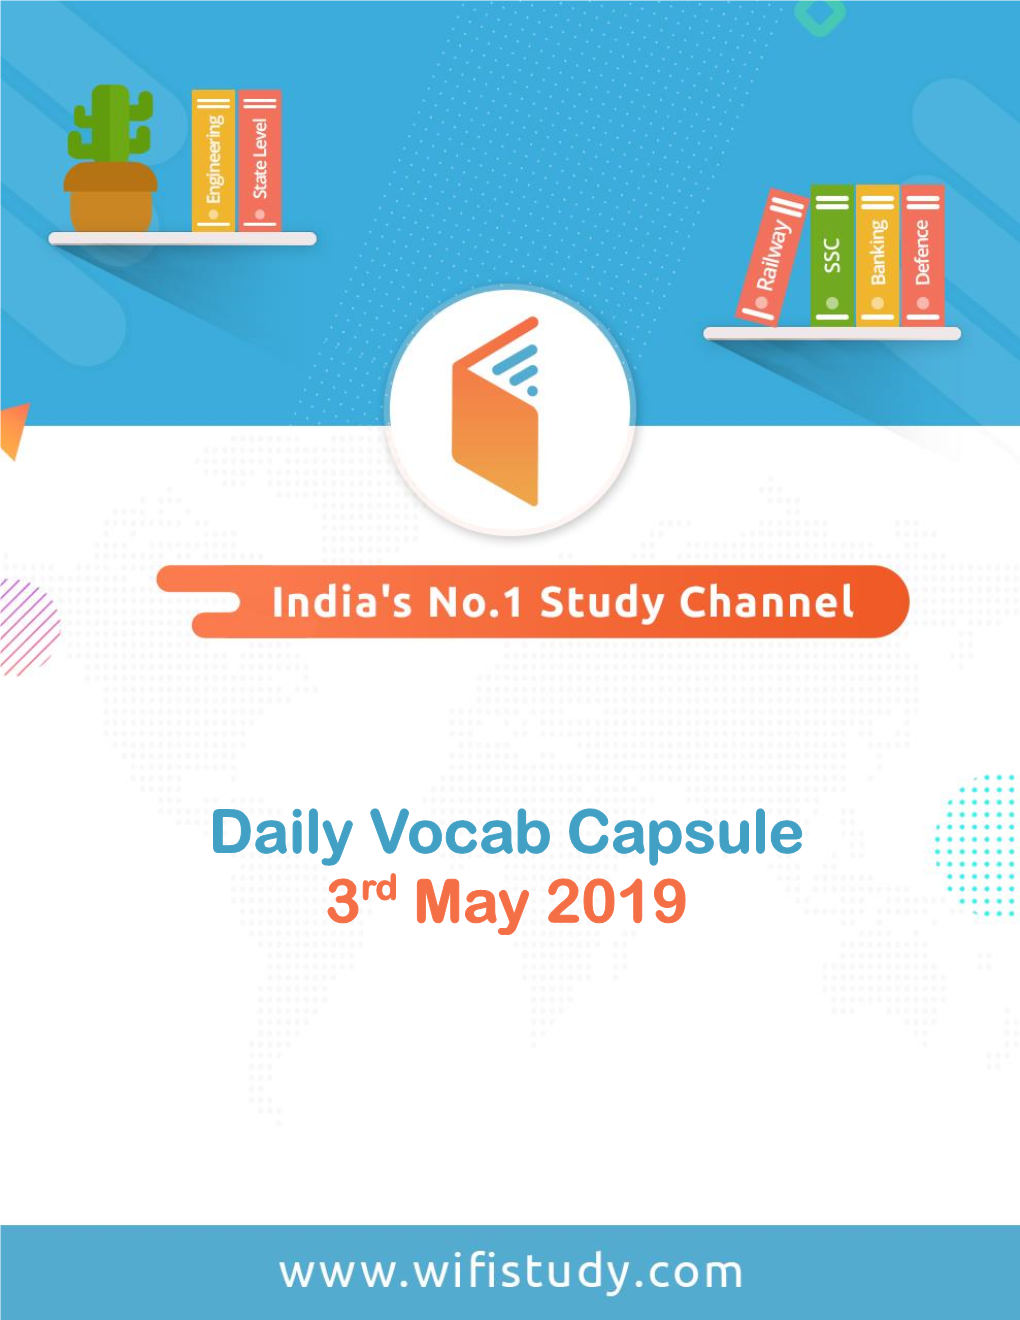 Daily Vocab Capsule 3Rd May 2019